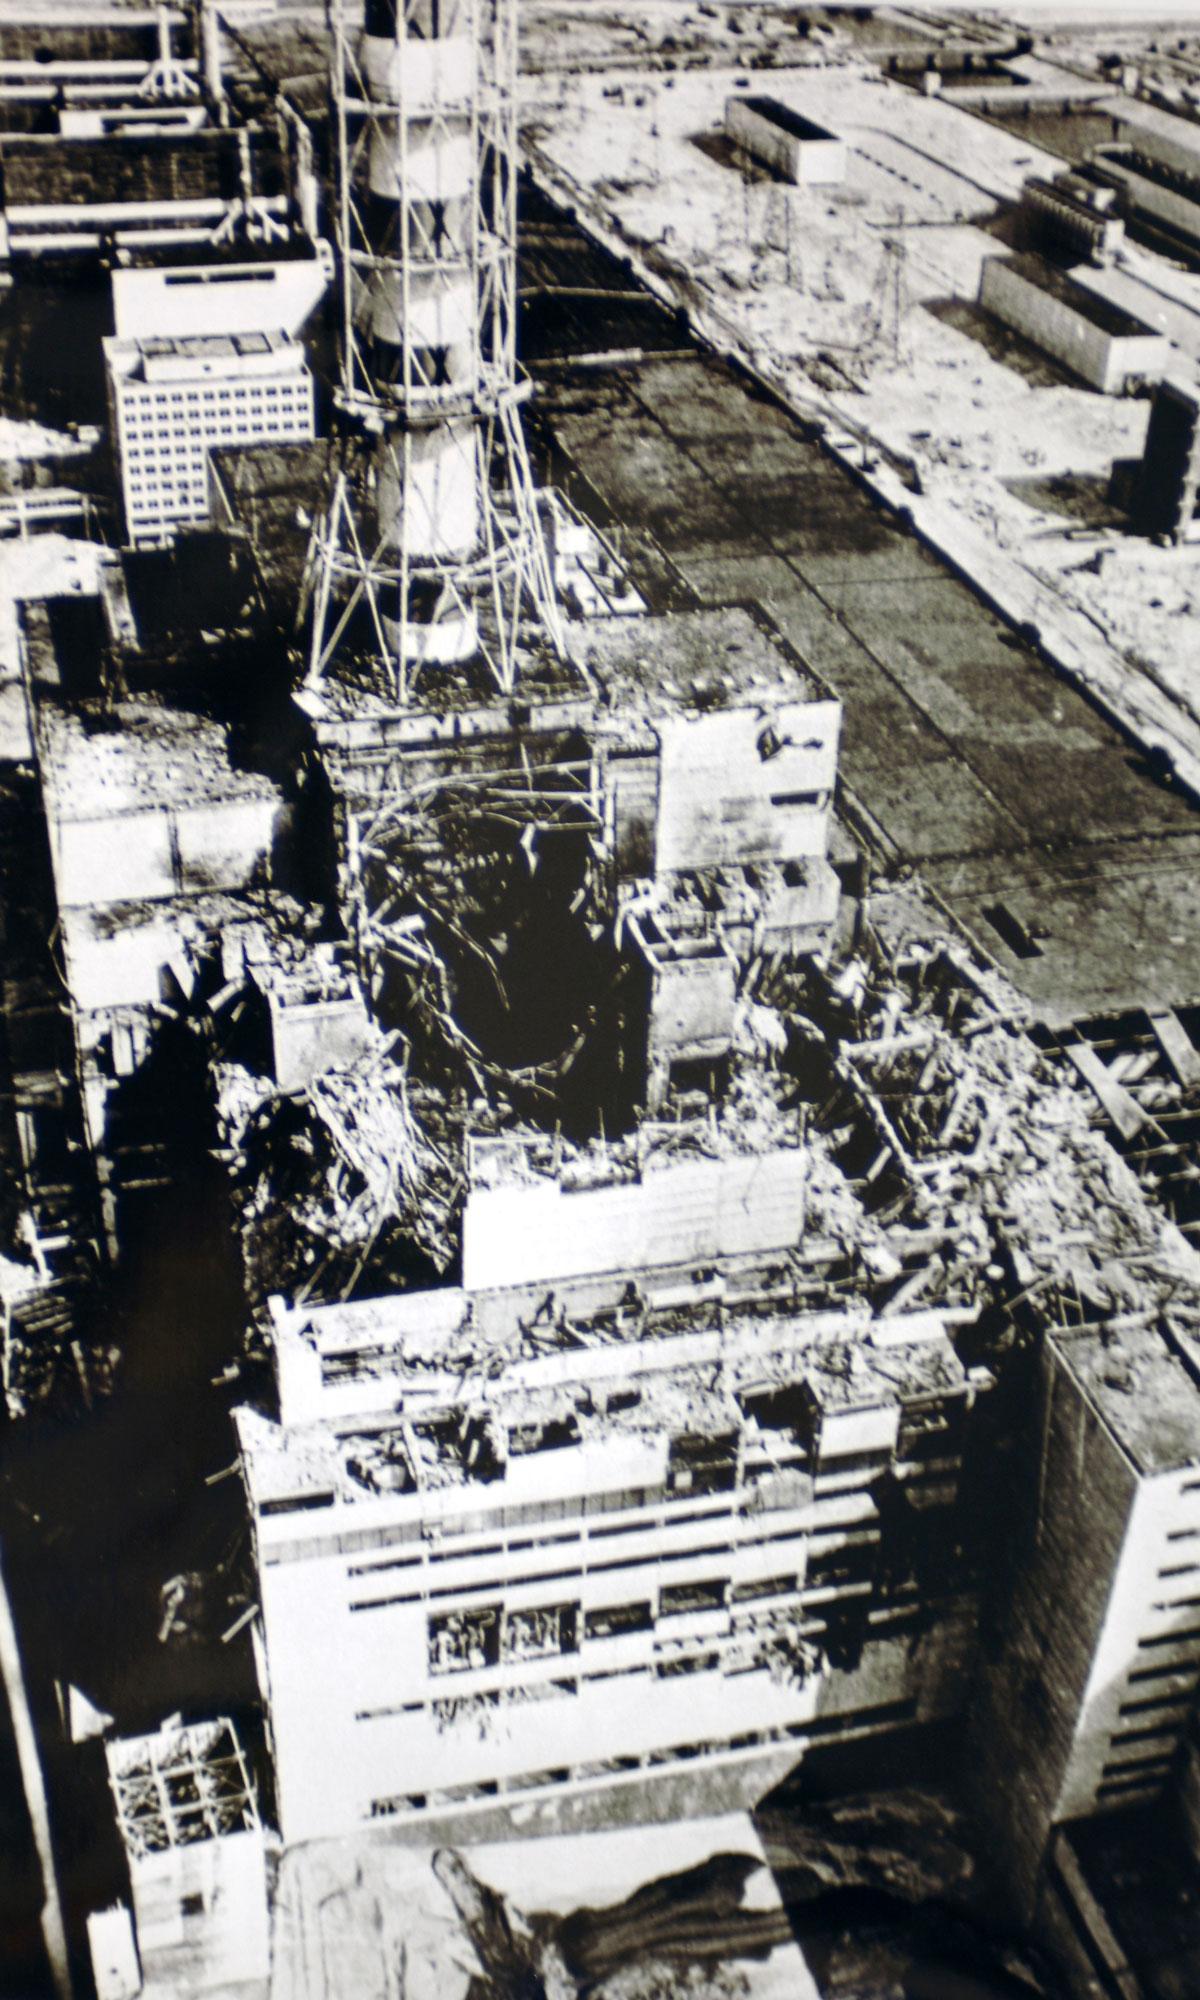 Chernobyl after catastrophe